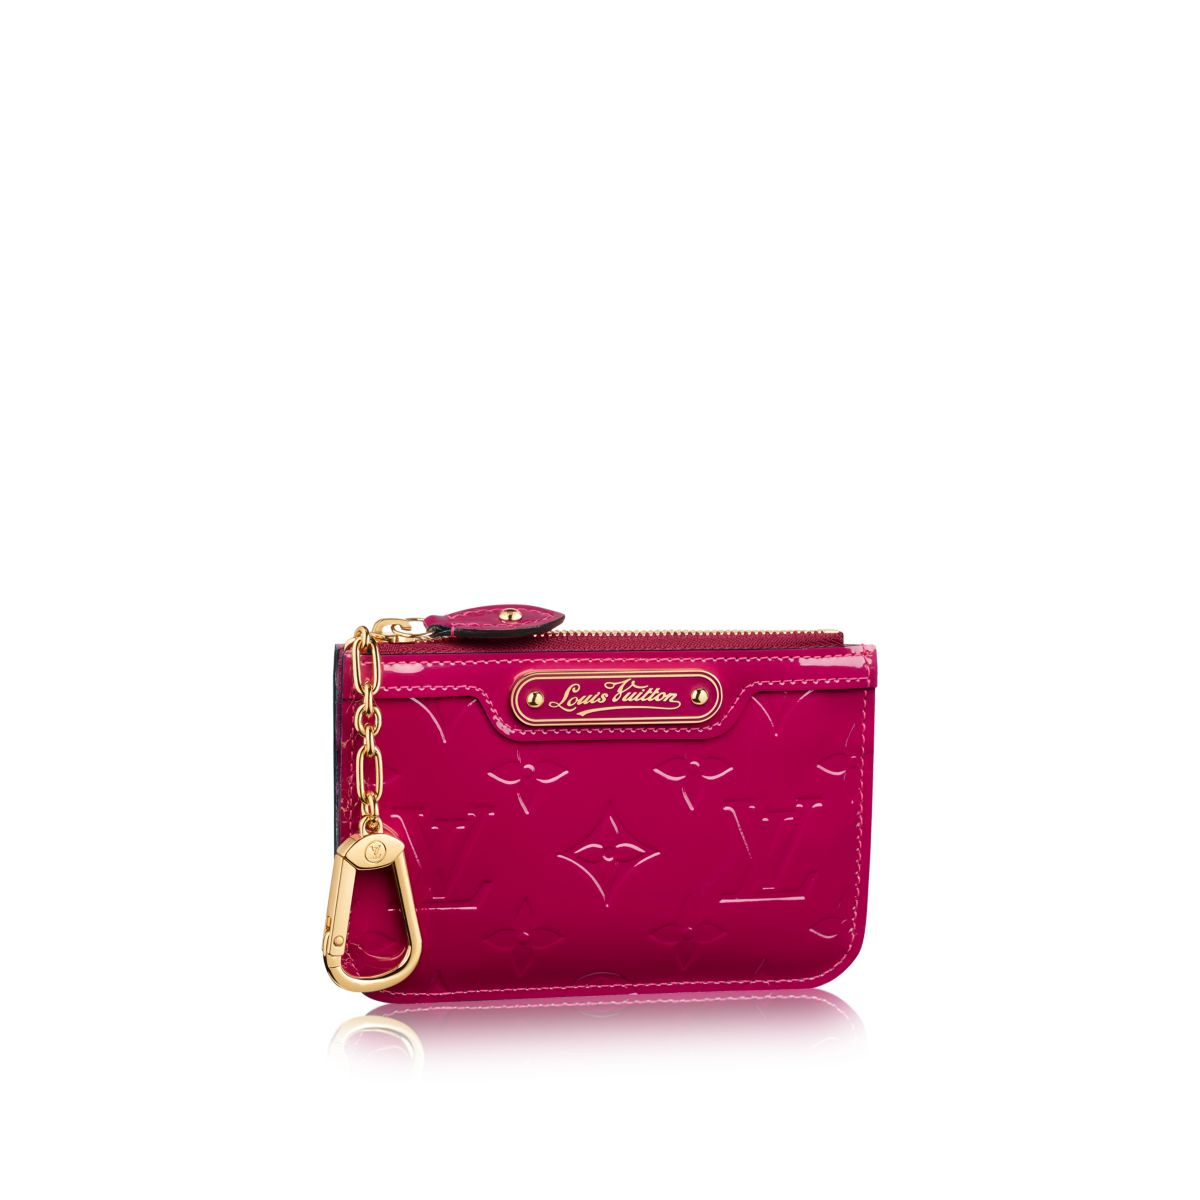 Louis vuitton Key Pouch in Pink (INDIAN ROSE Monogram Vernis) | Lyst